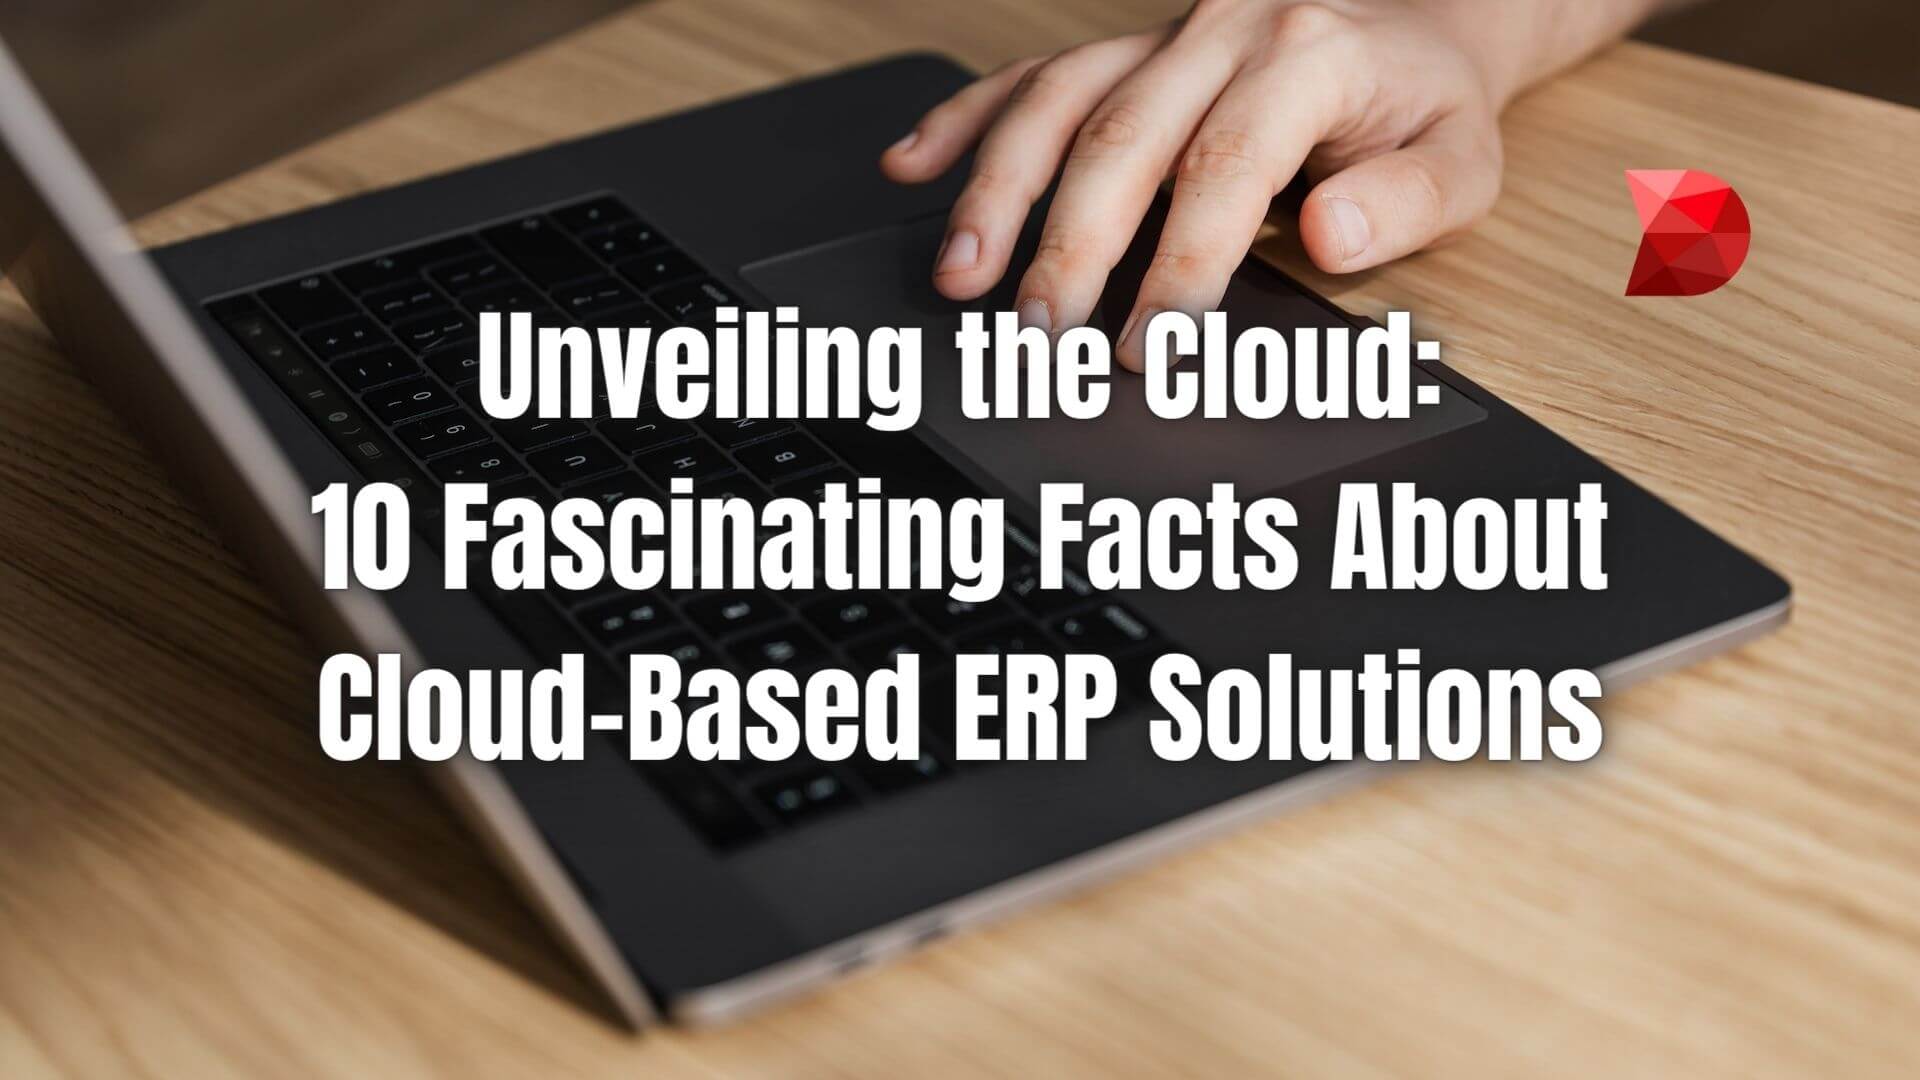 Cloud ERP has been revolutionizing the business world with its scalability and cost-effectiveness. Here are some facts about Cloud ERP.